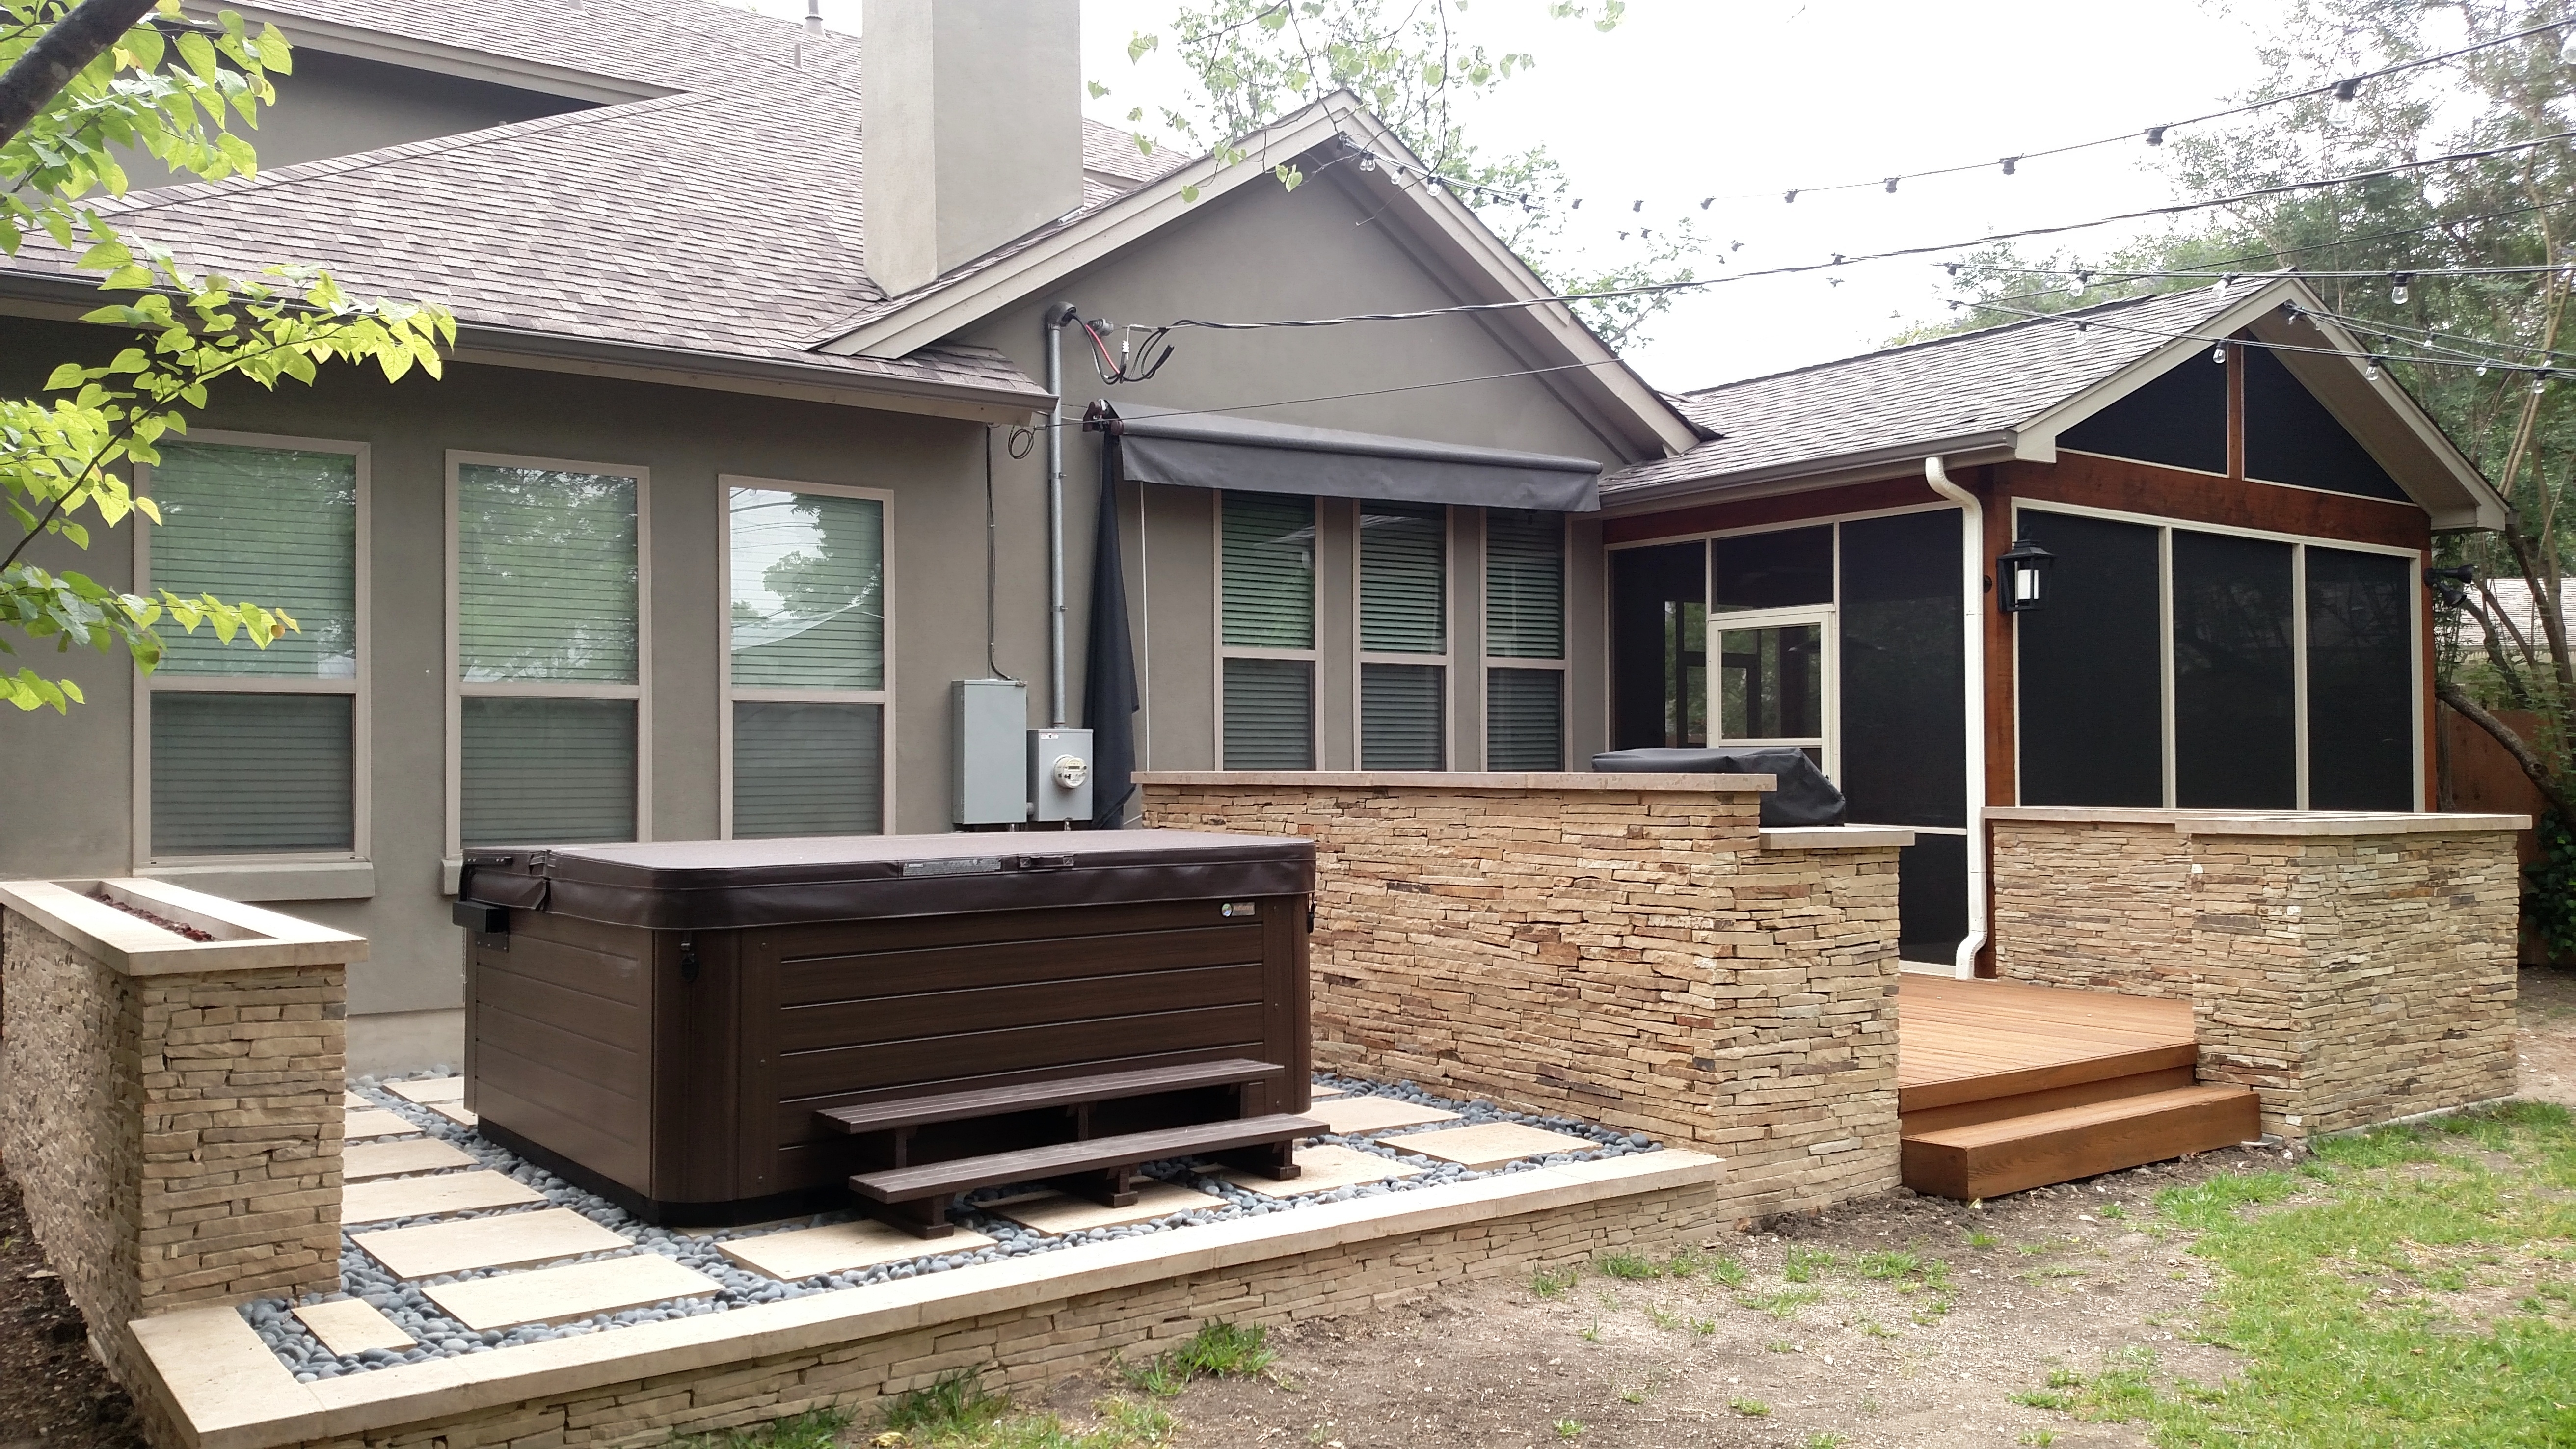 Archadeck of Austin has developed a specialty of helping homeowners maximize their outdoor living spaces while complying with City of Austin water quality